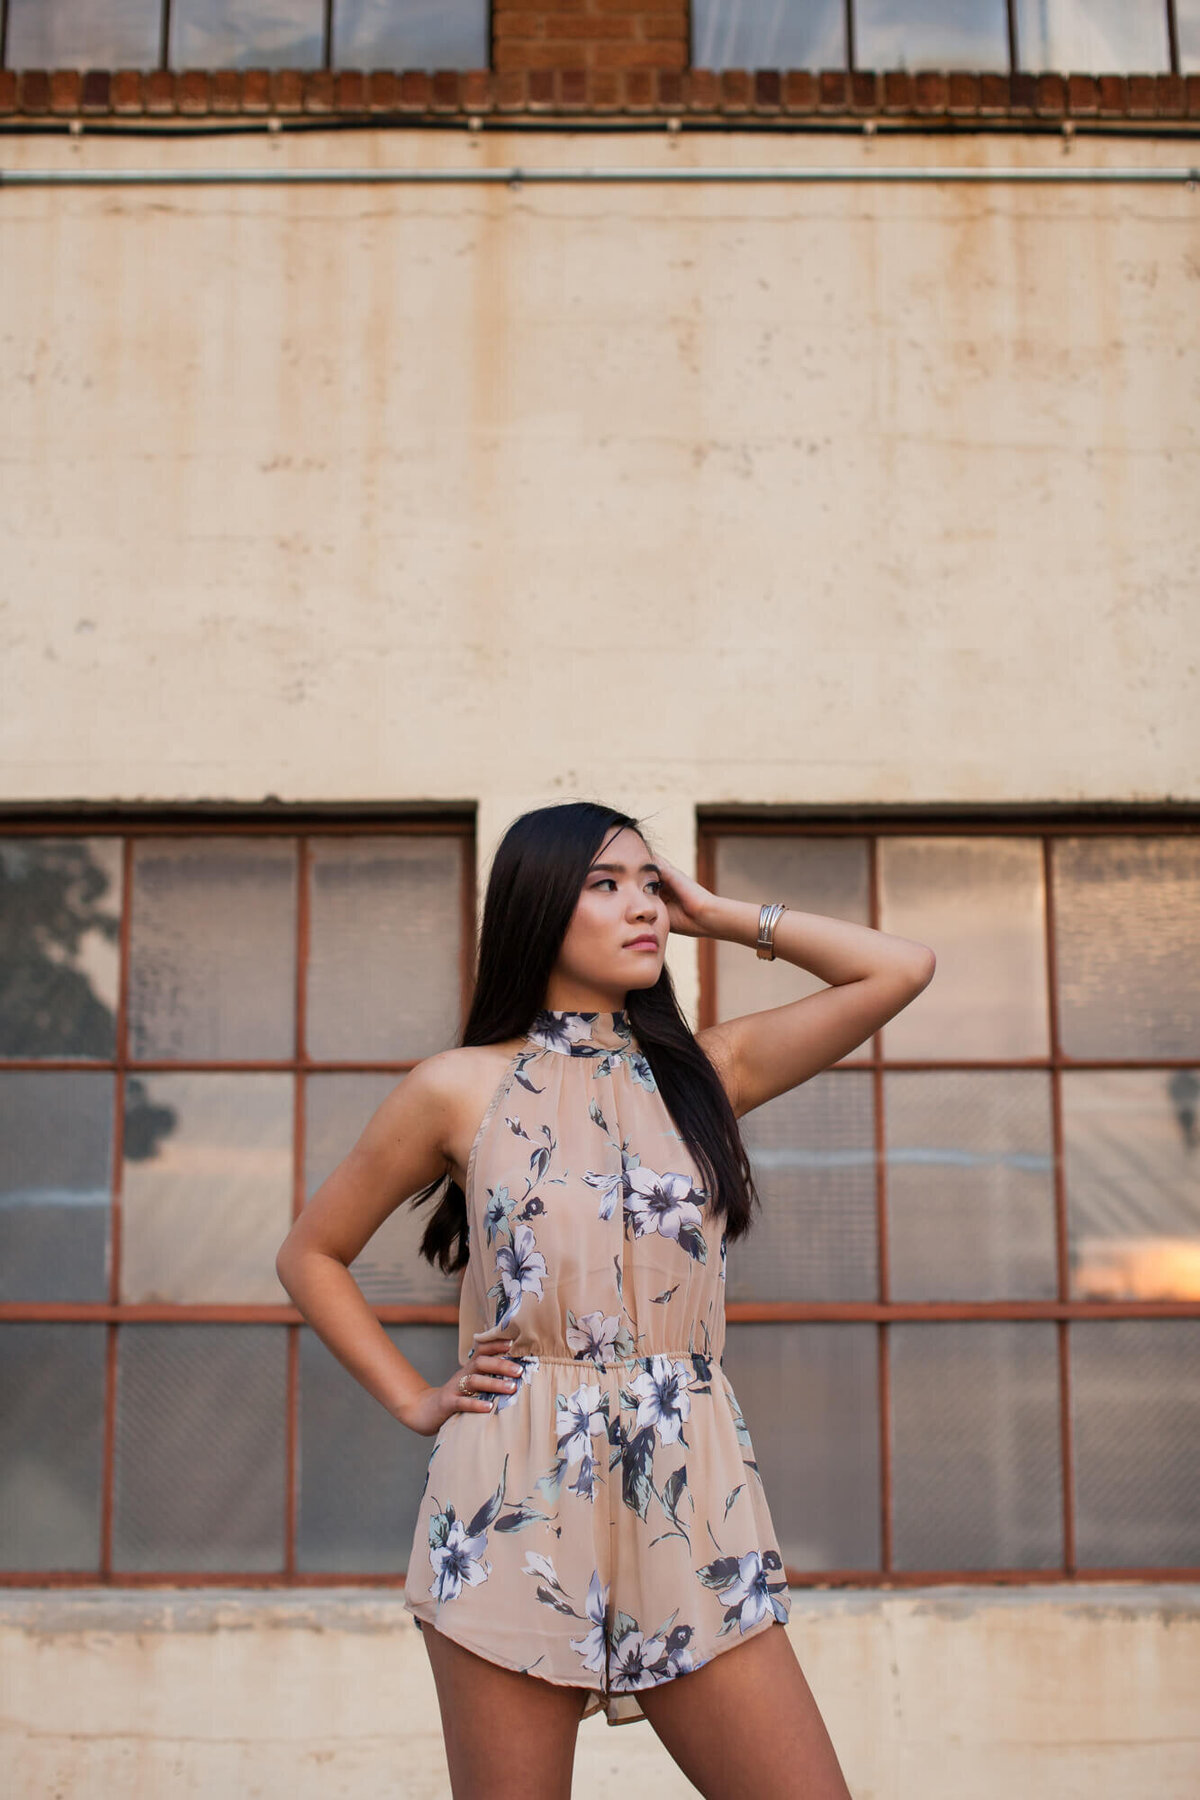 A confidently posed Asian American senior girl wearing a short dusty rose floral romper in downtown. Captured by Springfield, MO senior photographer Dynae Levingston.